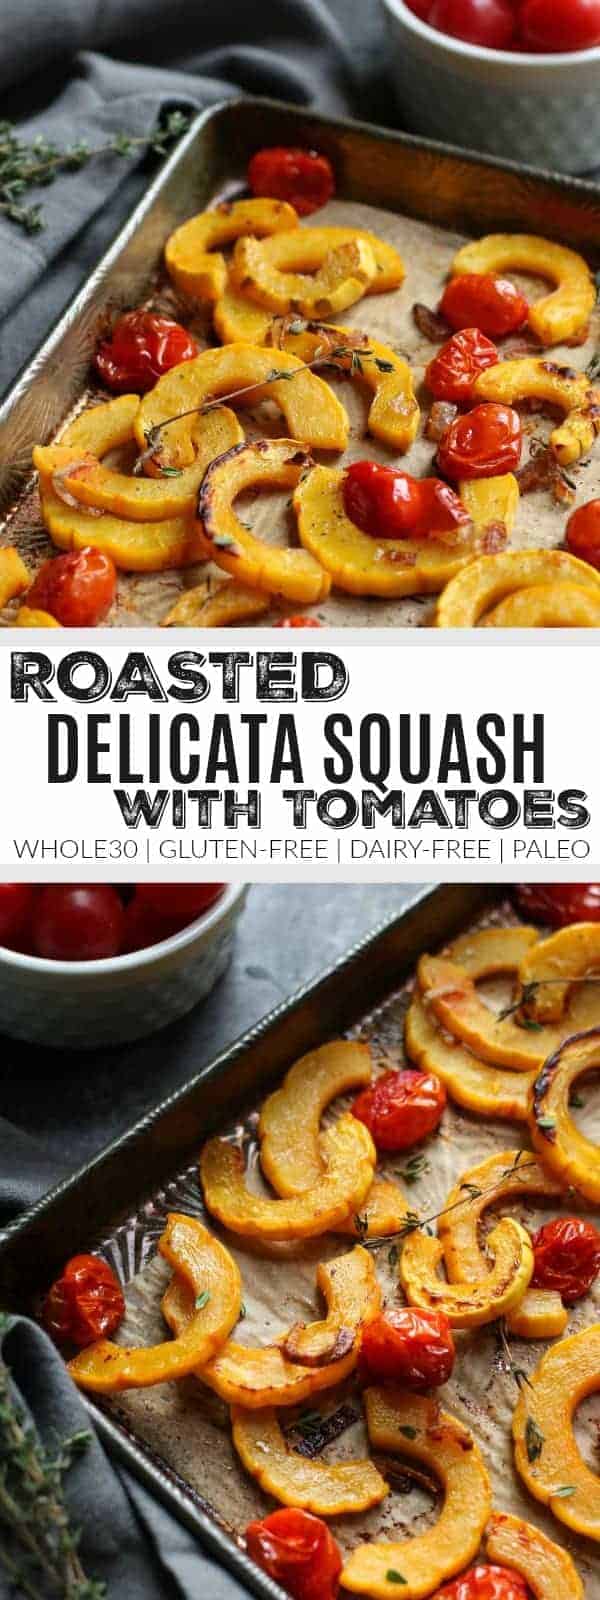 Roasted Delicata Squash with Tomatoes | healthy squash recipes | healthy side dishes | how to roast delicata squash | delicata squash recipes | Whole30 side dishes | gluten free side dishes | dairy free side dishes | paleo side dishes || The Real Food Dietitians 